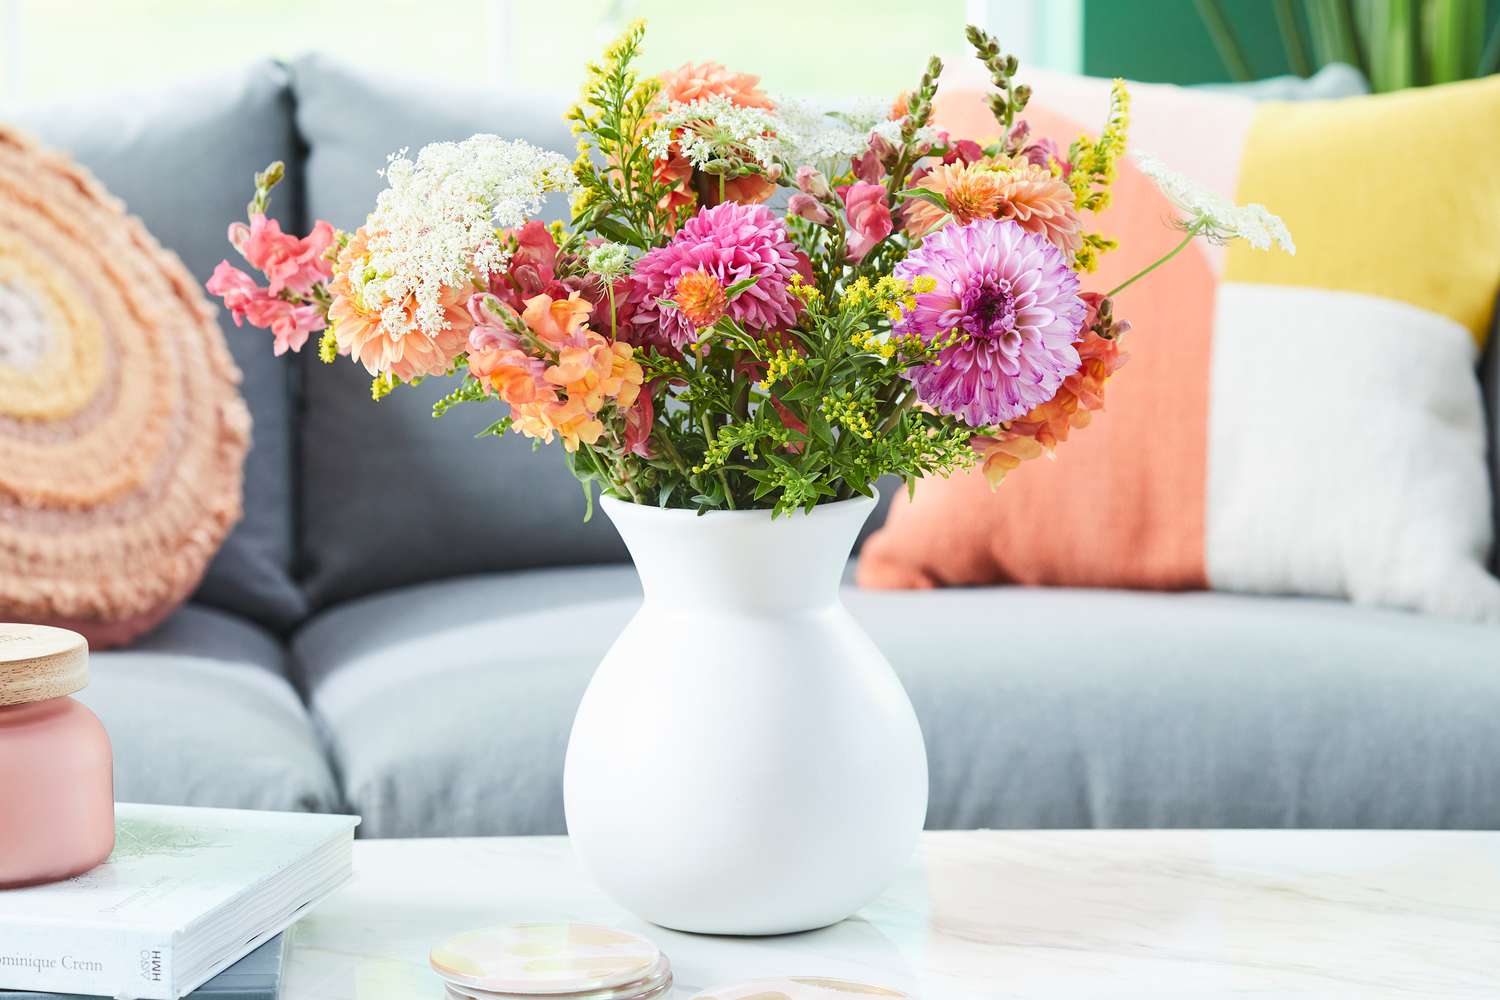 Spring flowers in a vase on a table in closeup